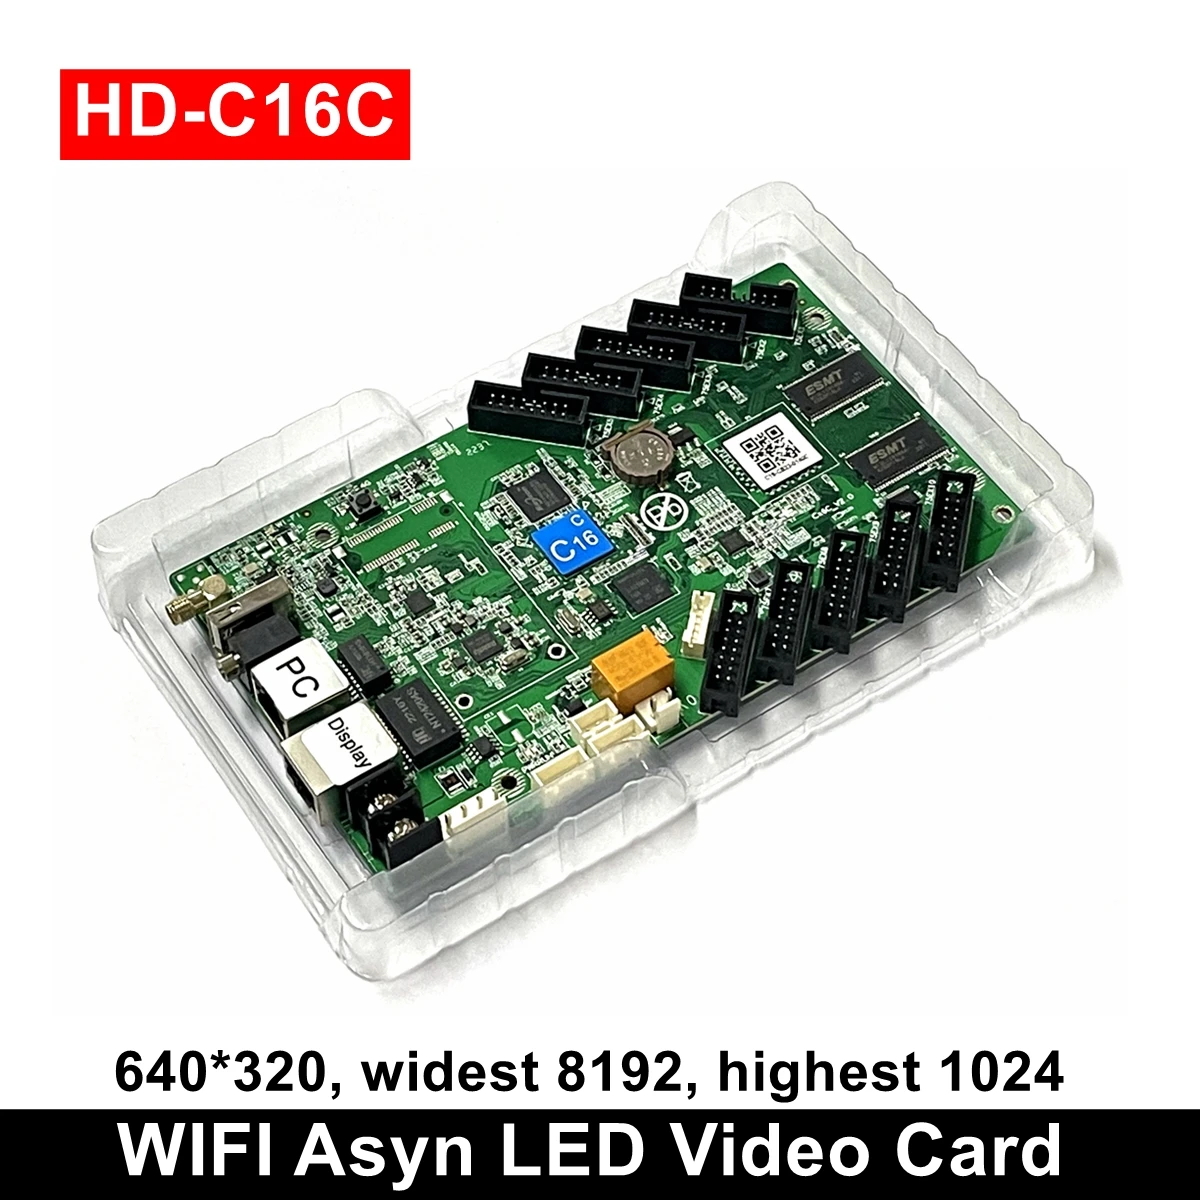 Huidu HD-C16C WIFI Asynchronous Indoor Outdoor LED Video Display Card Can Add 4G